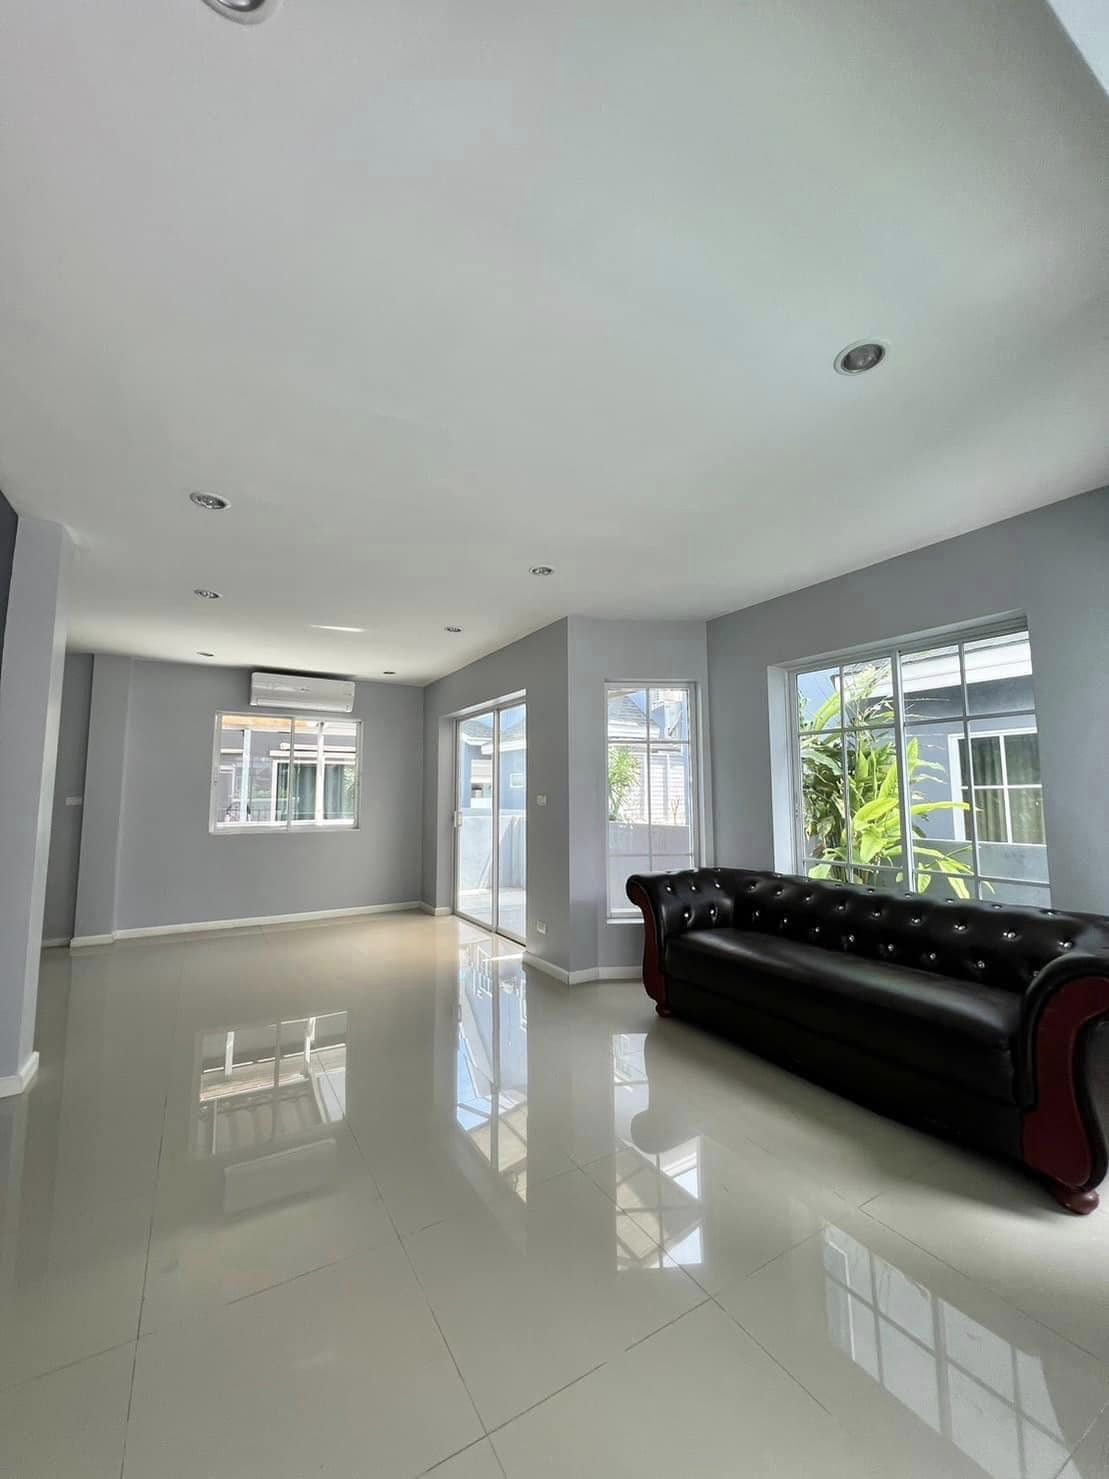 Winston Village. New house with 3 bedrooms in the village close to Sukhumvit Road